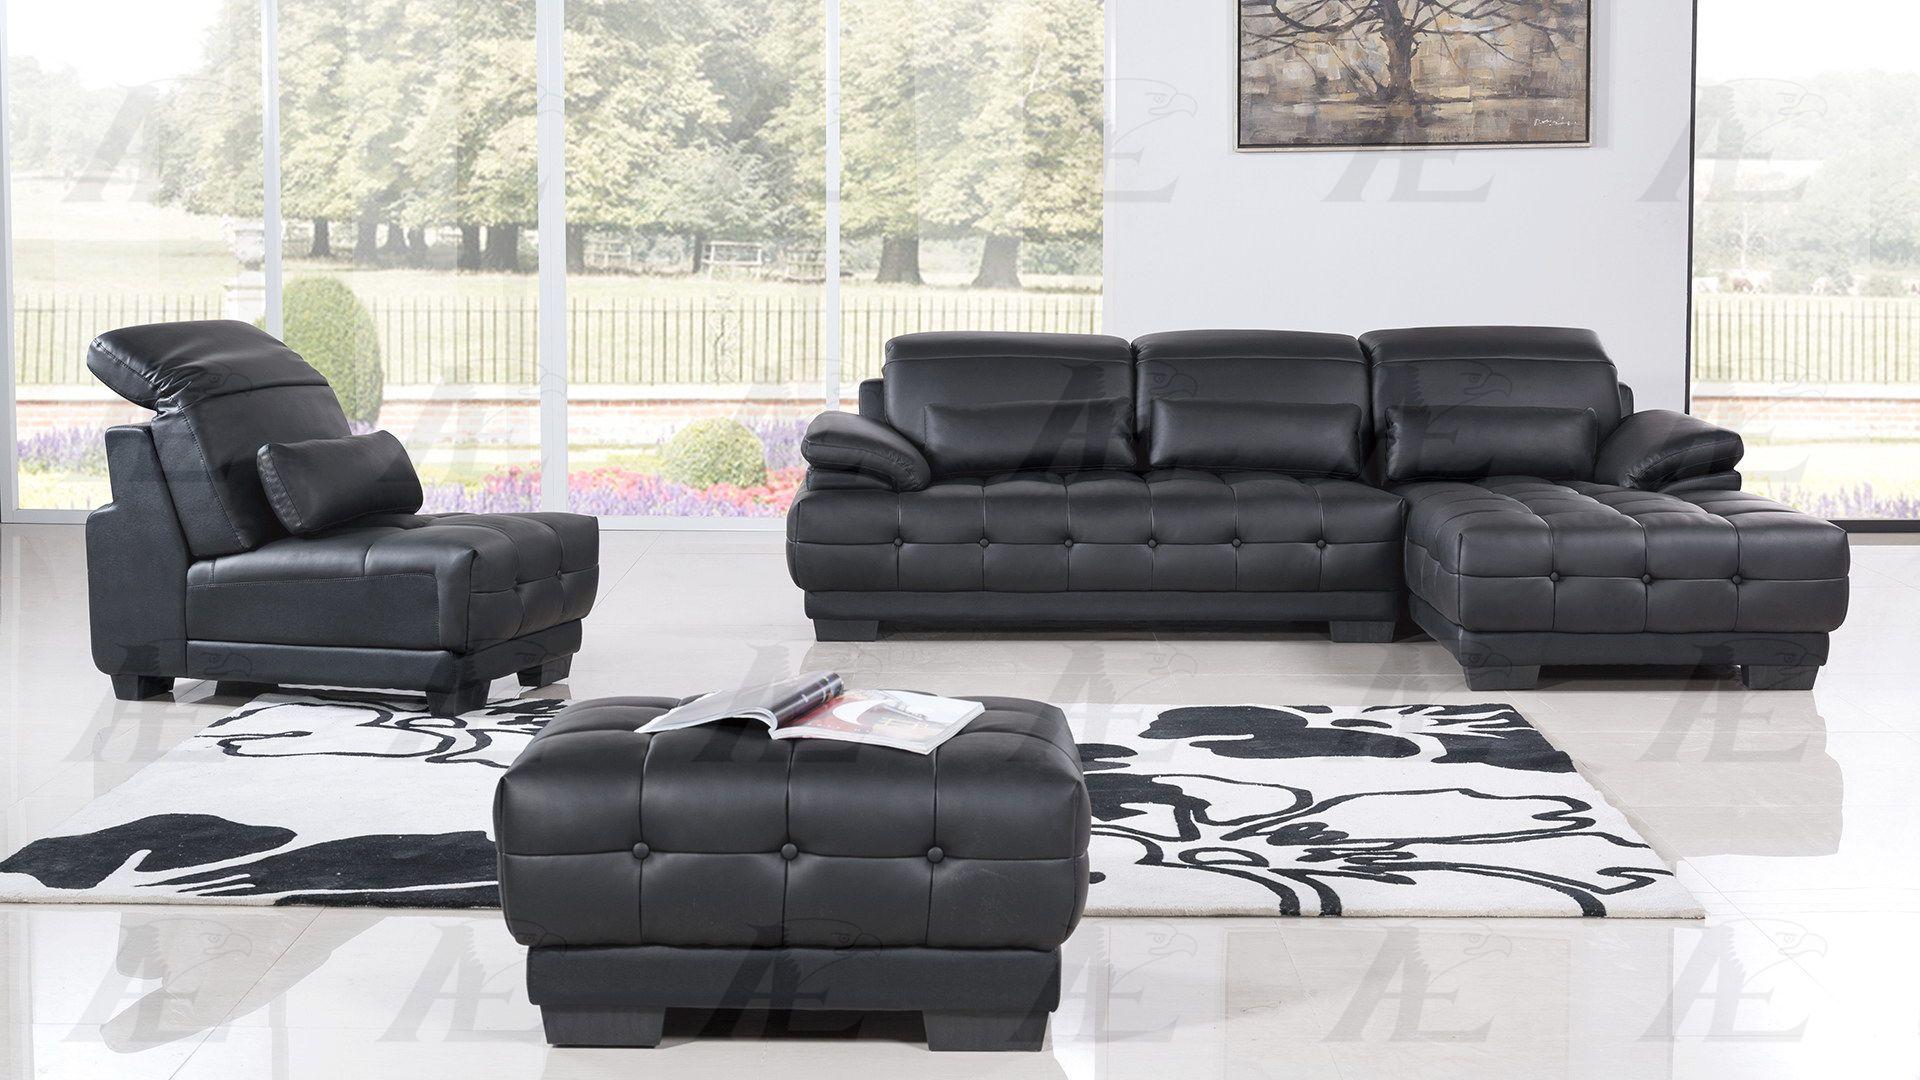 

    
American Eagle Furniture AE-L296-BK Sofa Chaise Chair and Ottoman Set Right Hand Chase Bonded Leather 4Pcs
